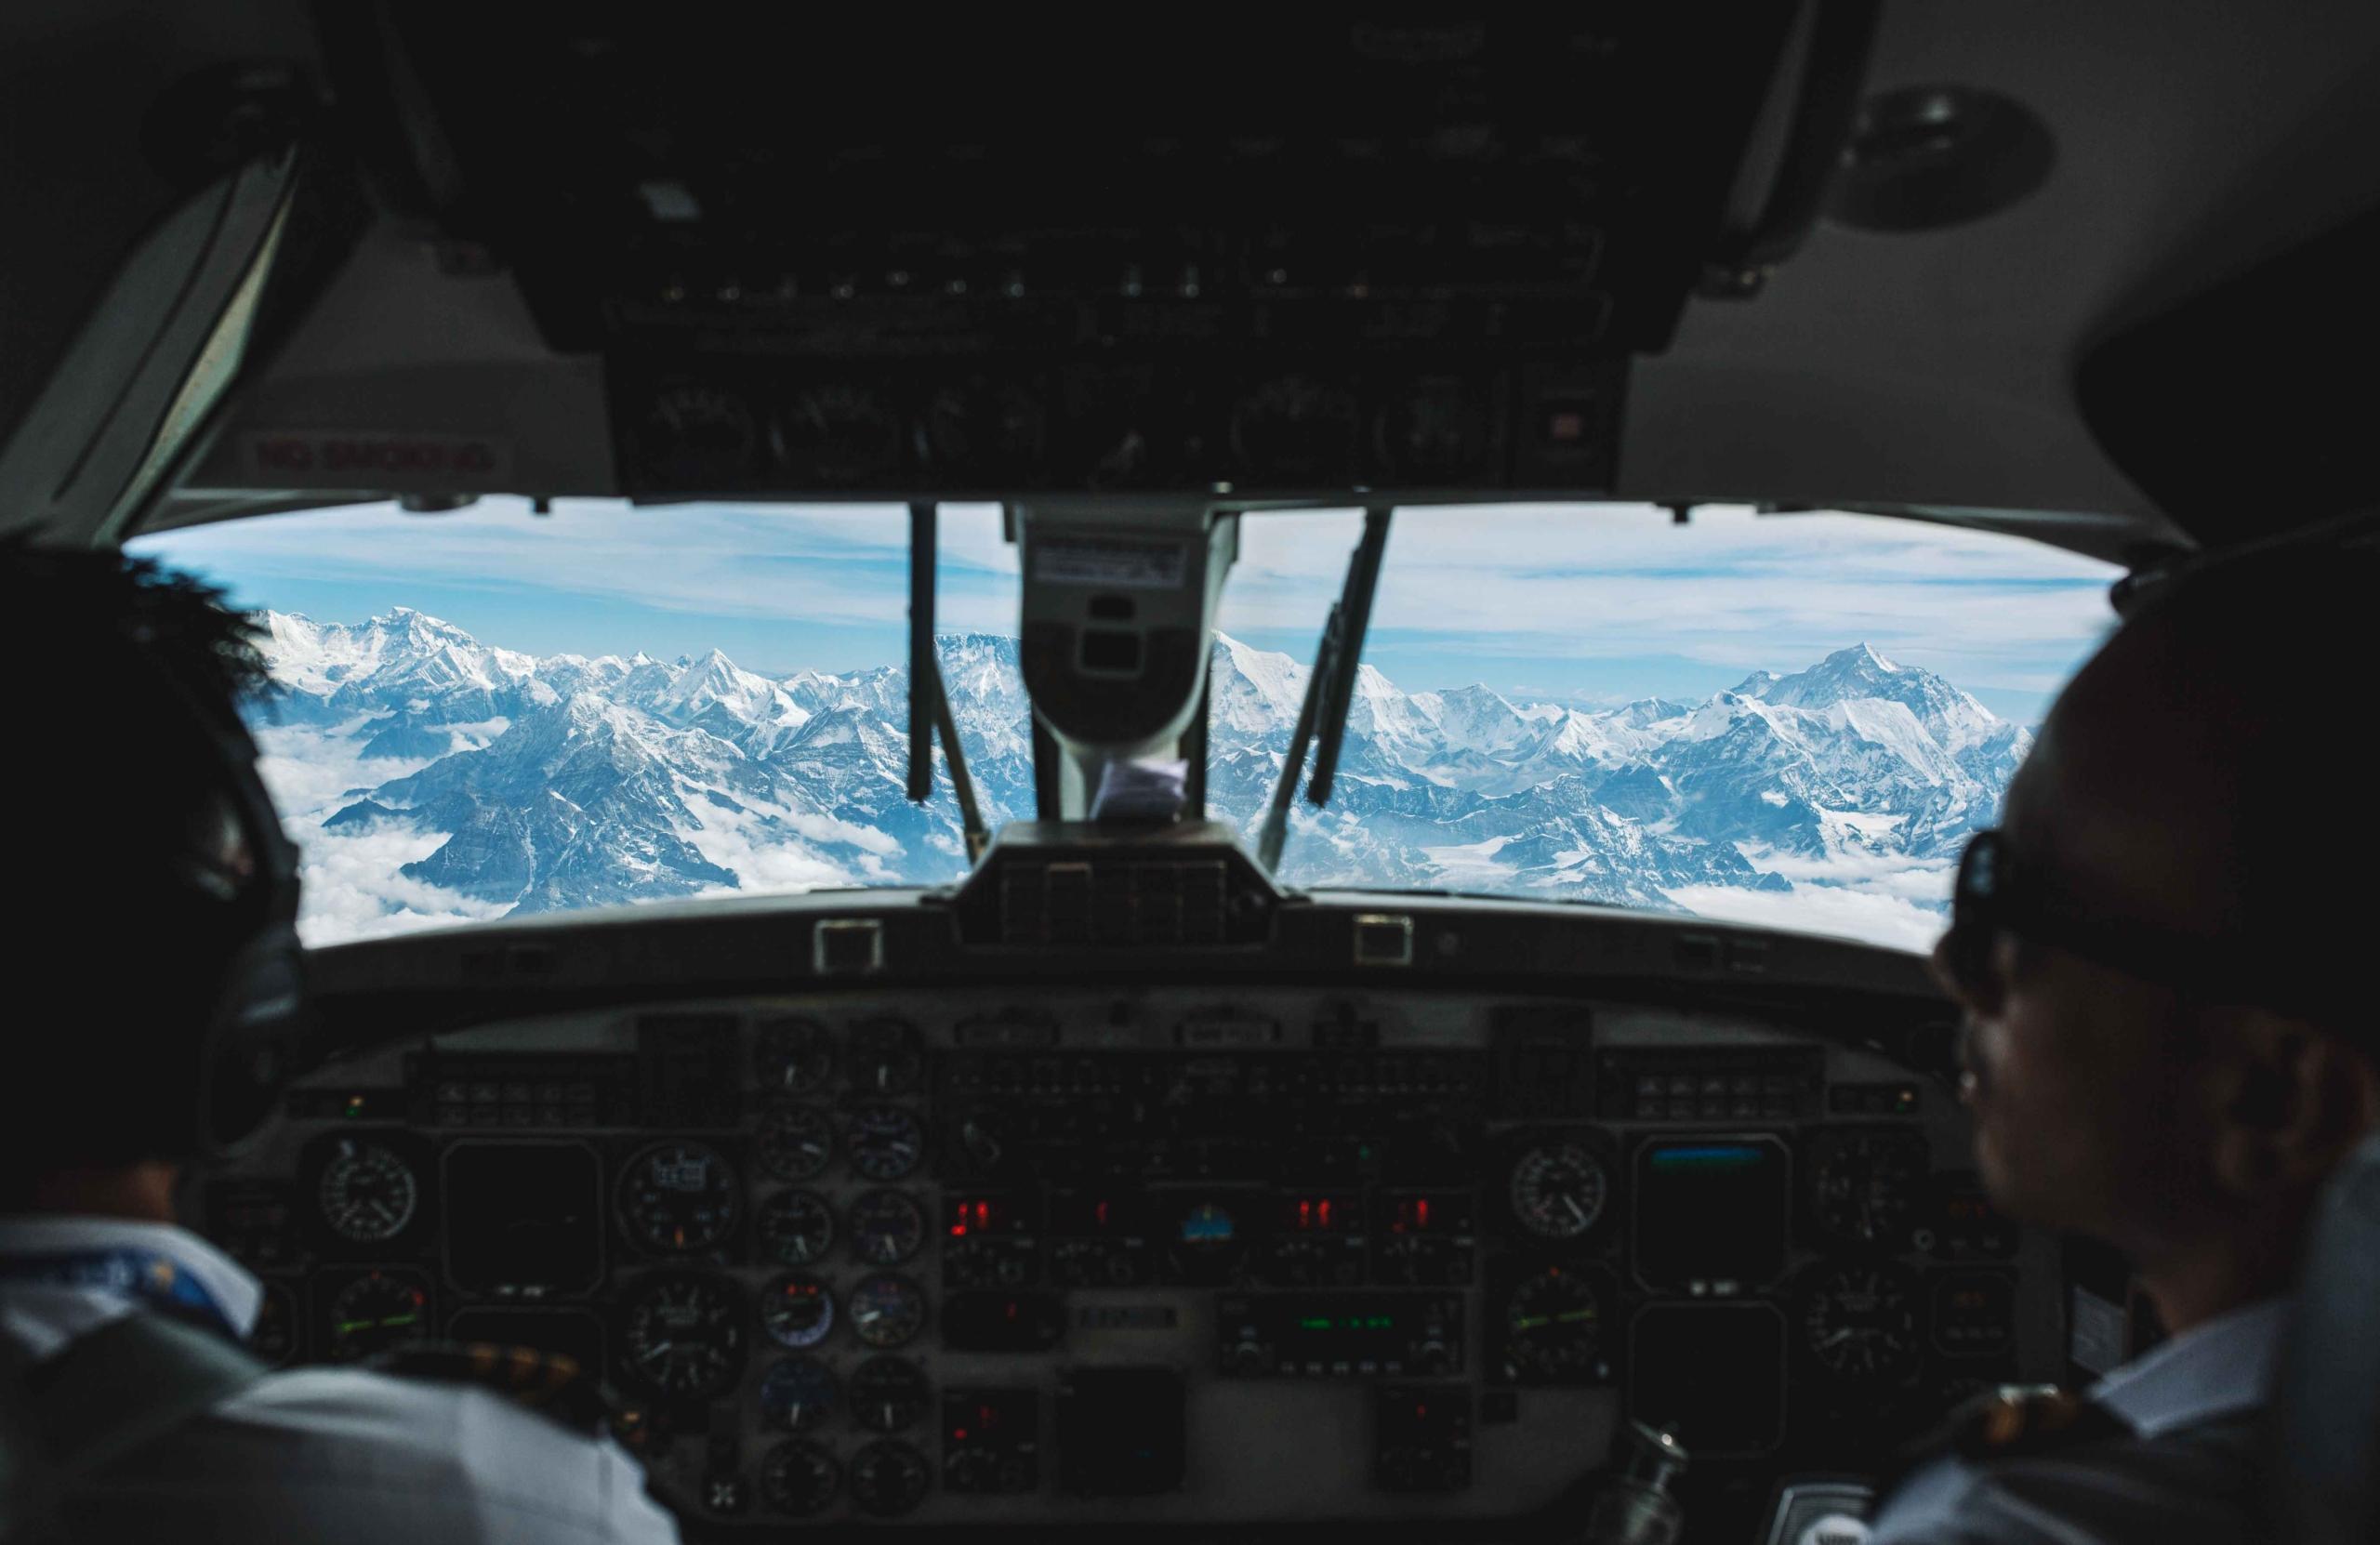 Pilots in a cockpit on a Mount Everest flight experience; mountains and clouds seen from the window.